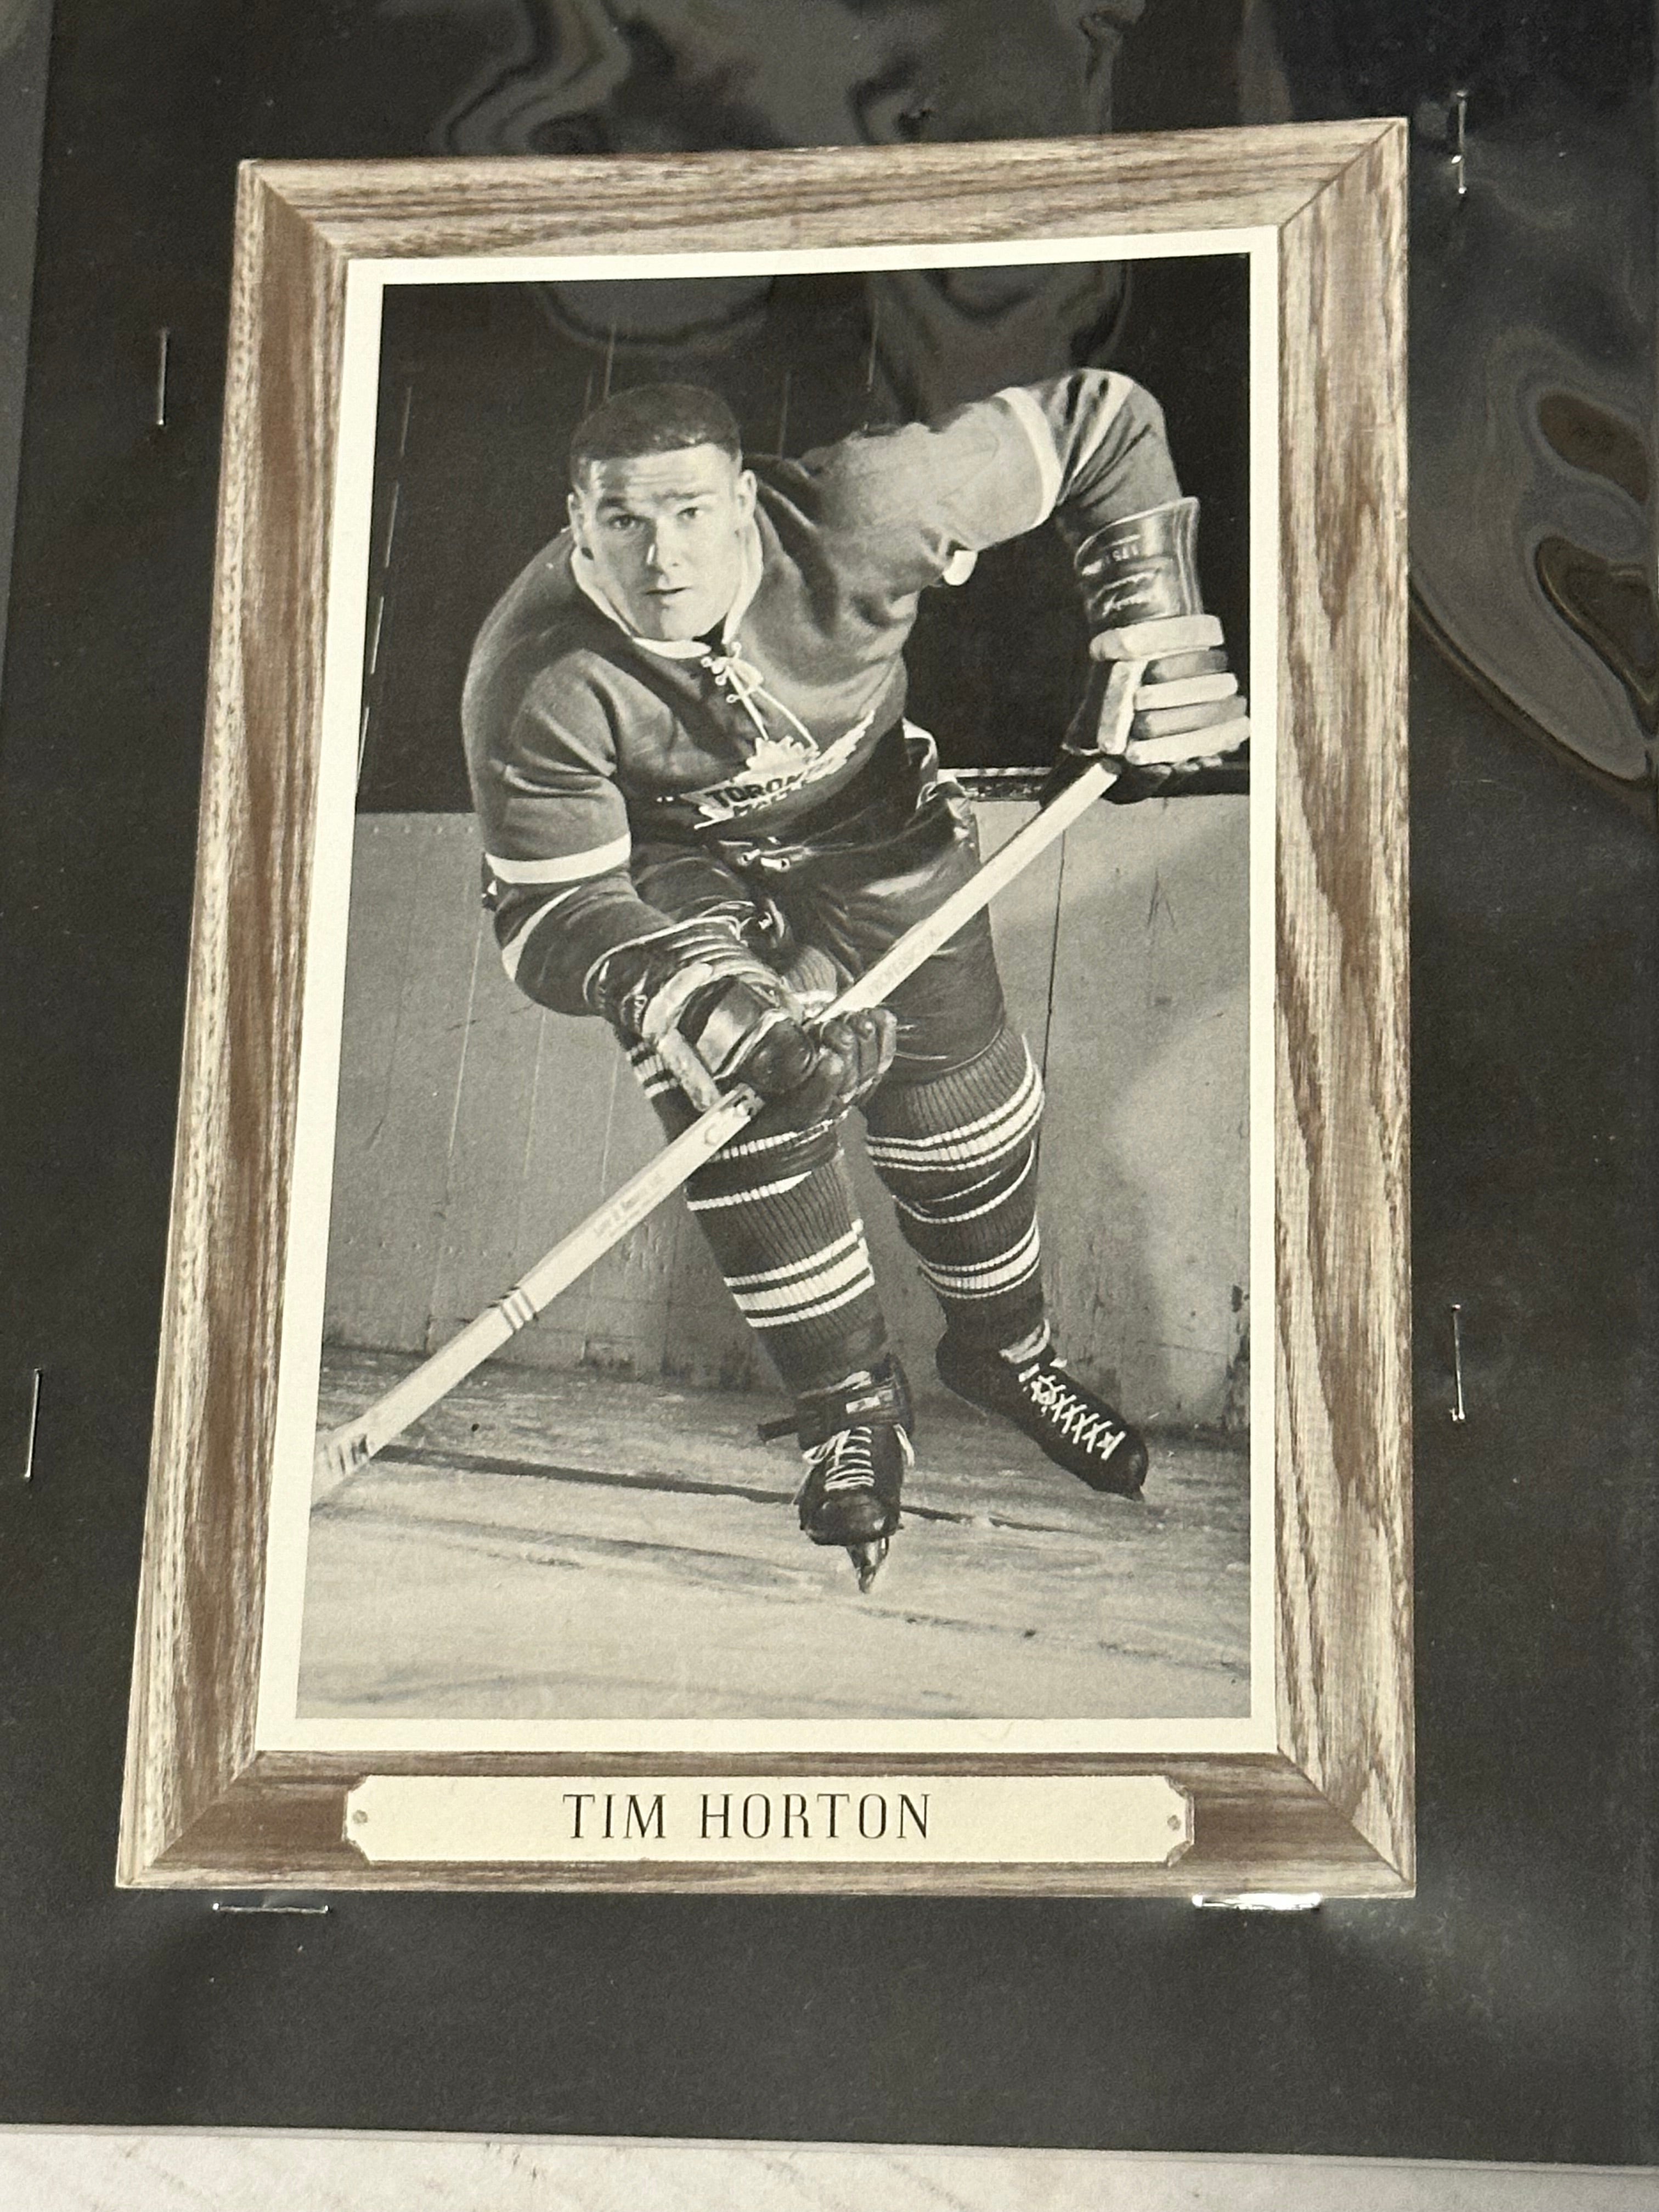 Tim Horton beehive photo great condition group 3 from 1964-67